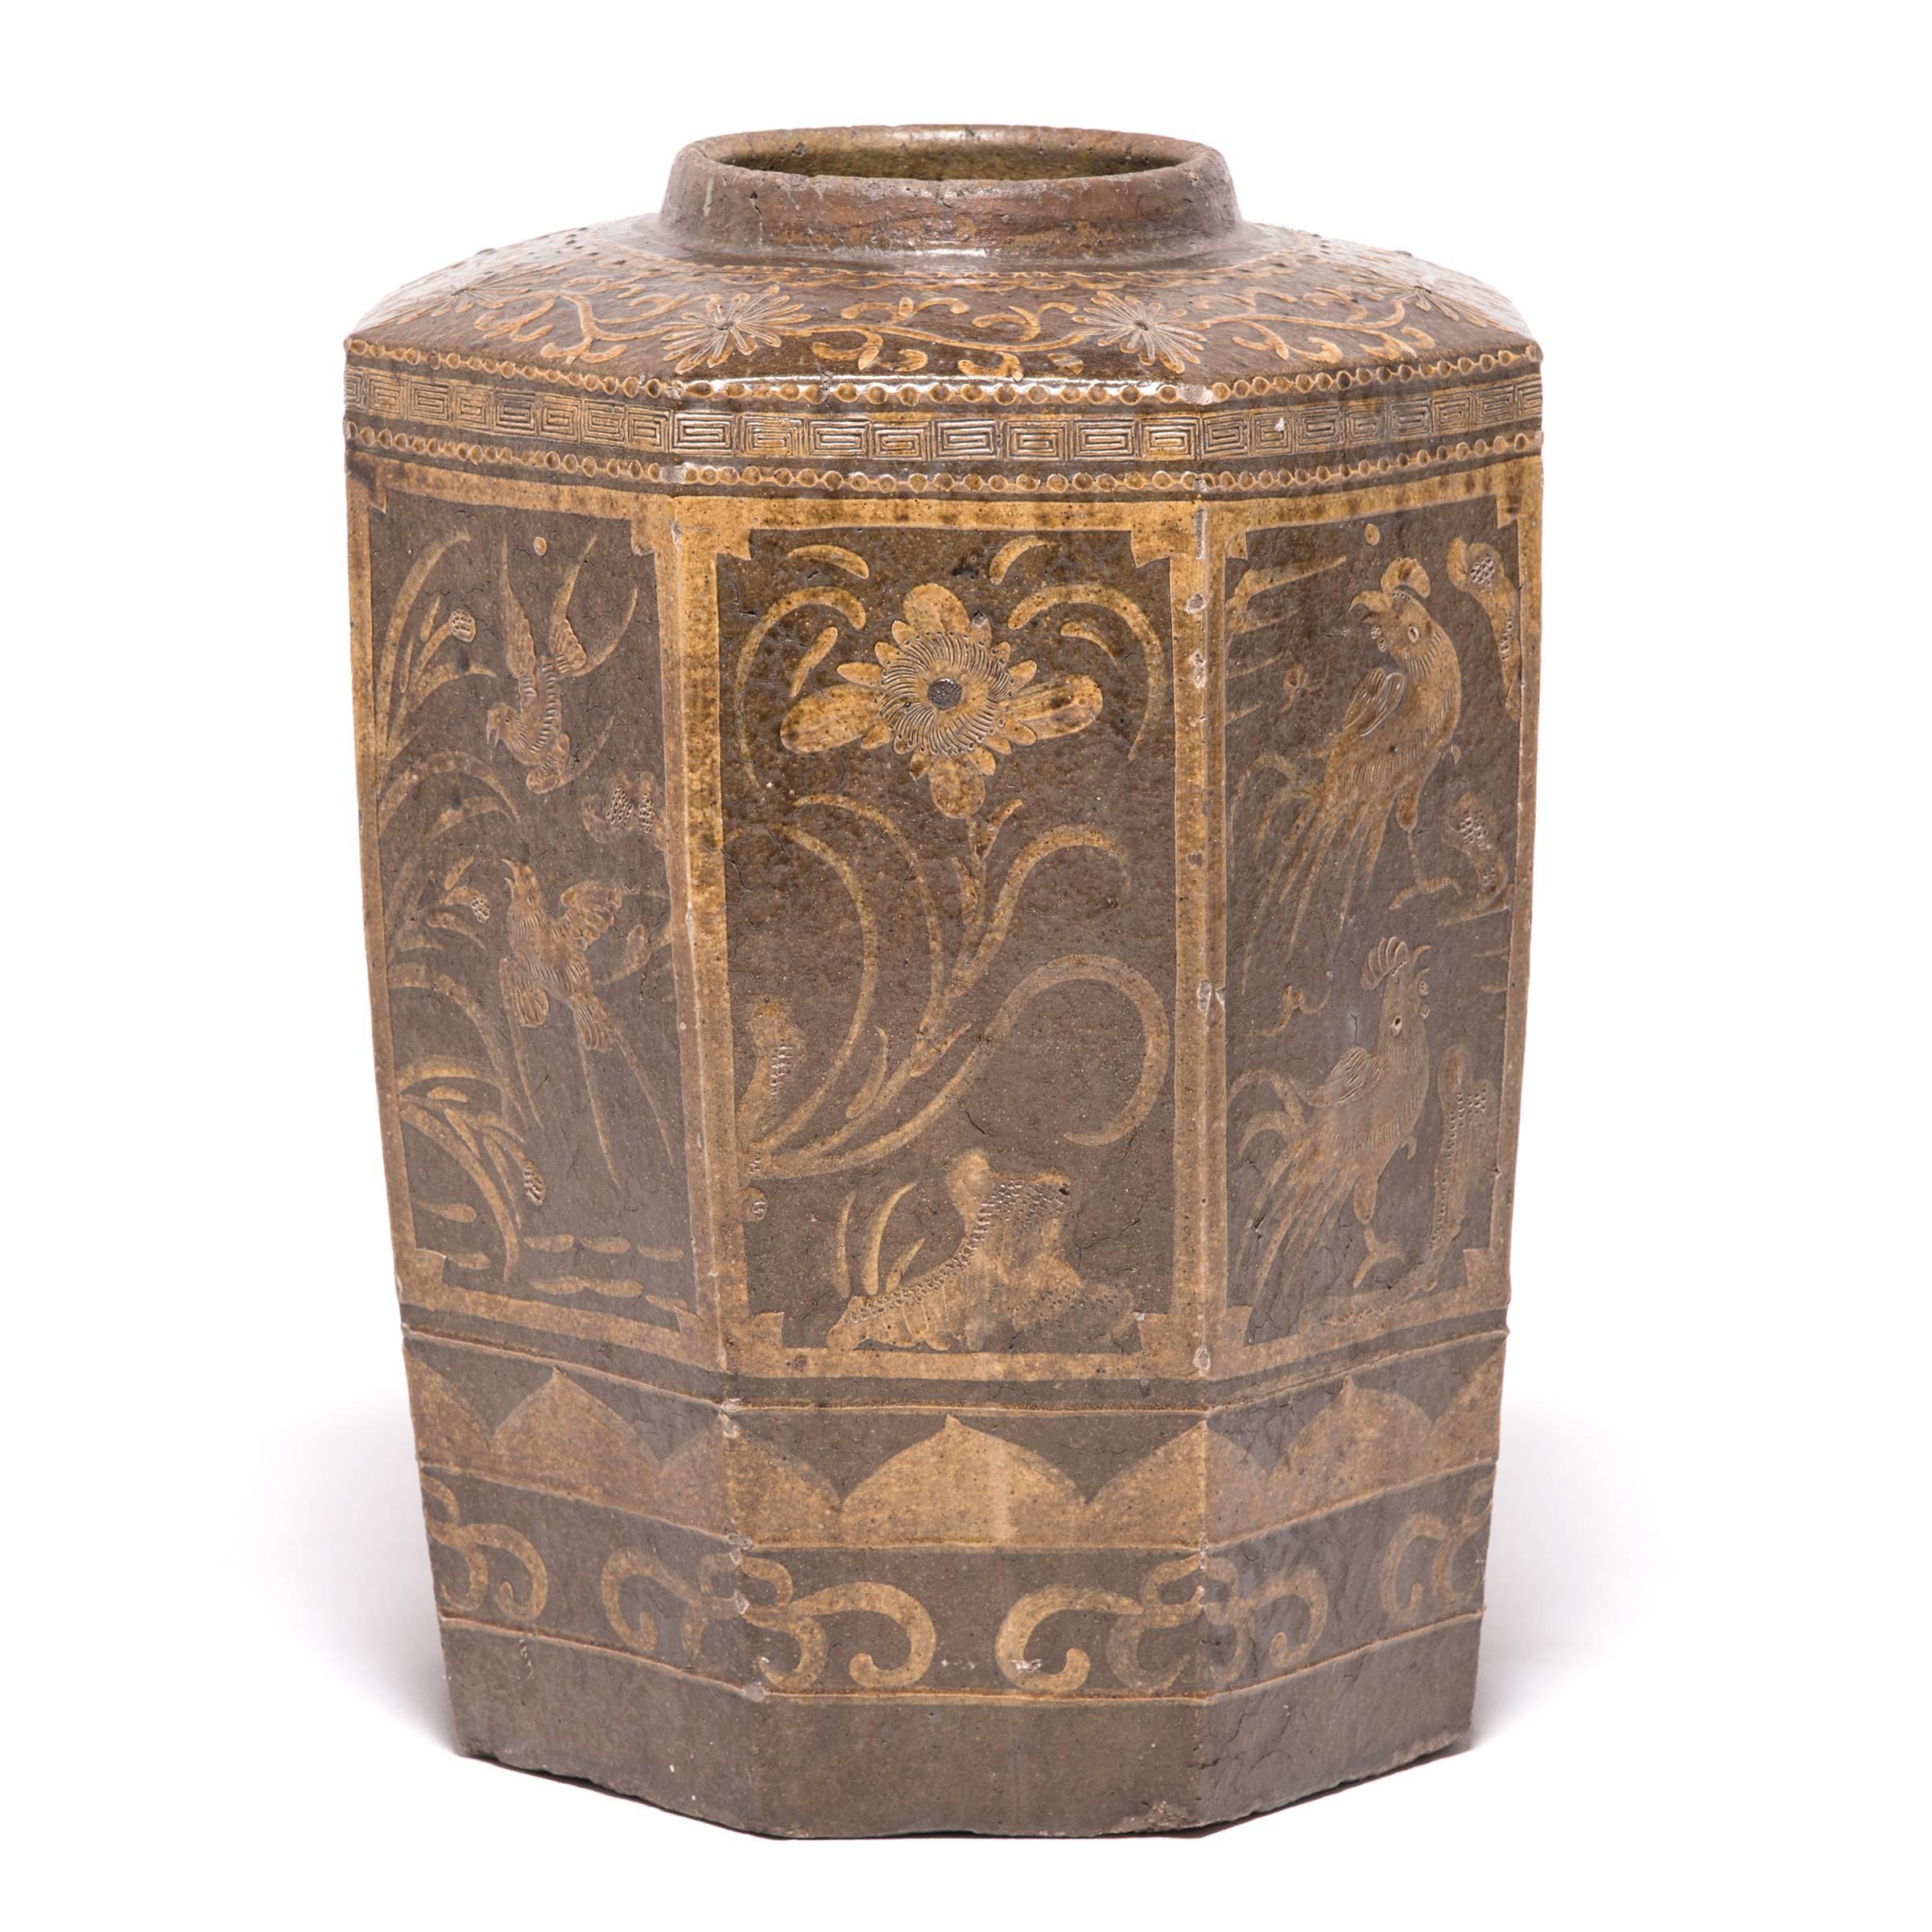 This 19th century eight-sided glazed urn from Southern China was finely painted with auspicious animals, including a crane, representing divine communication and immortality. The monumental scale allows for fantastic detail of a multitude of natural